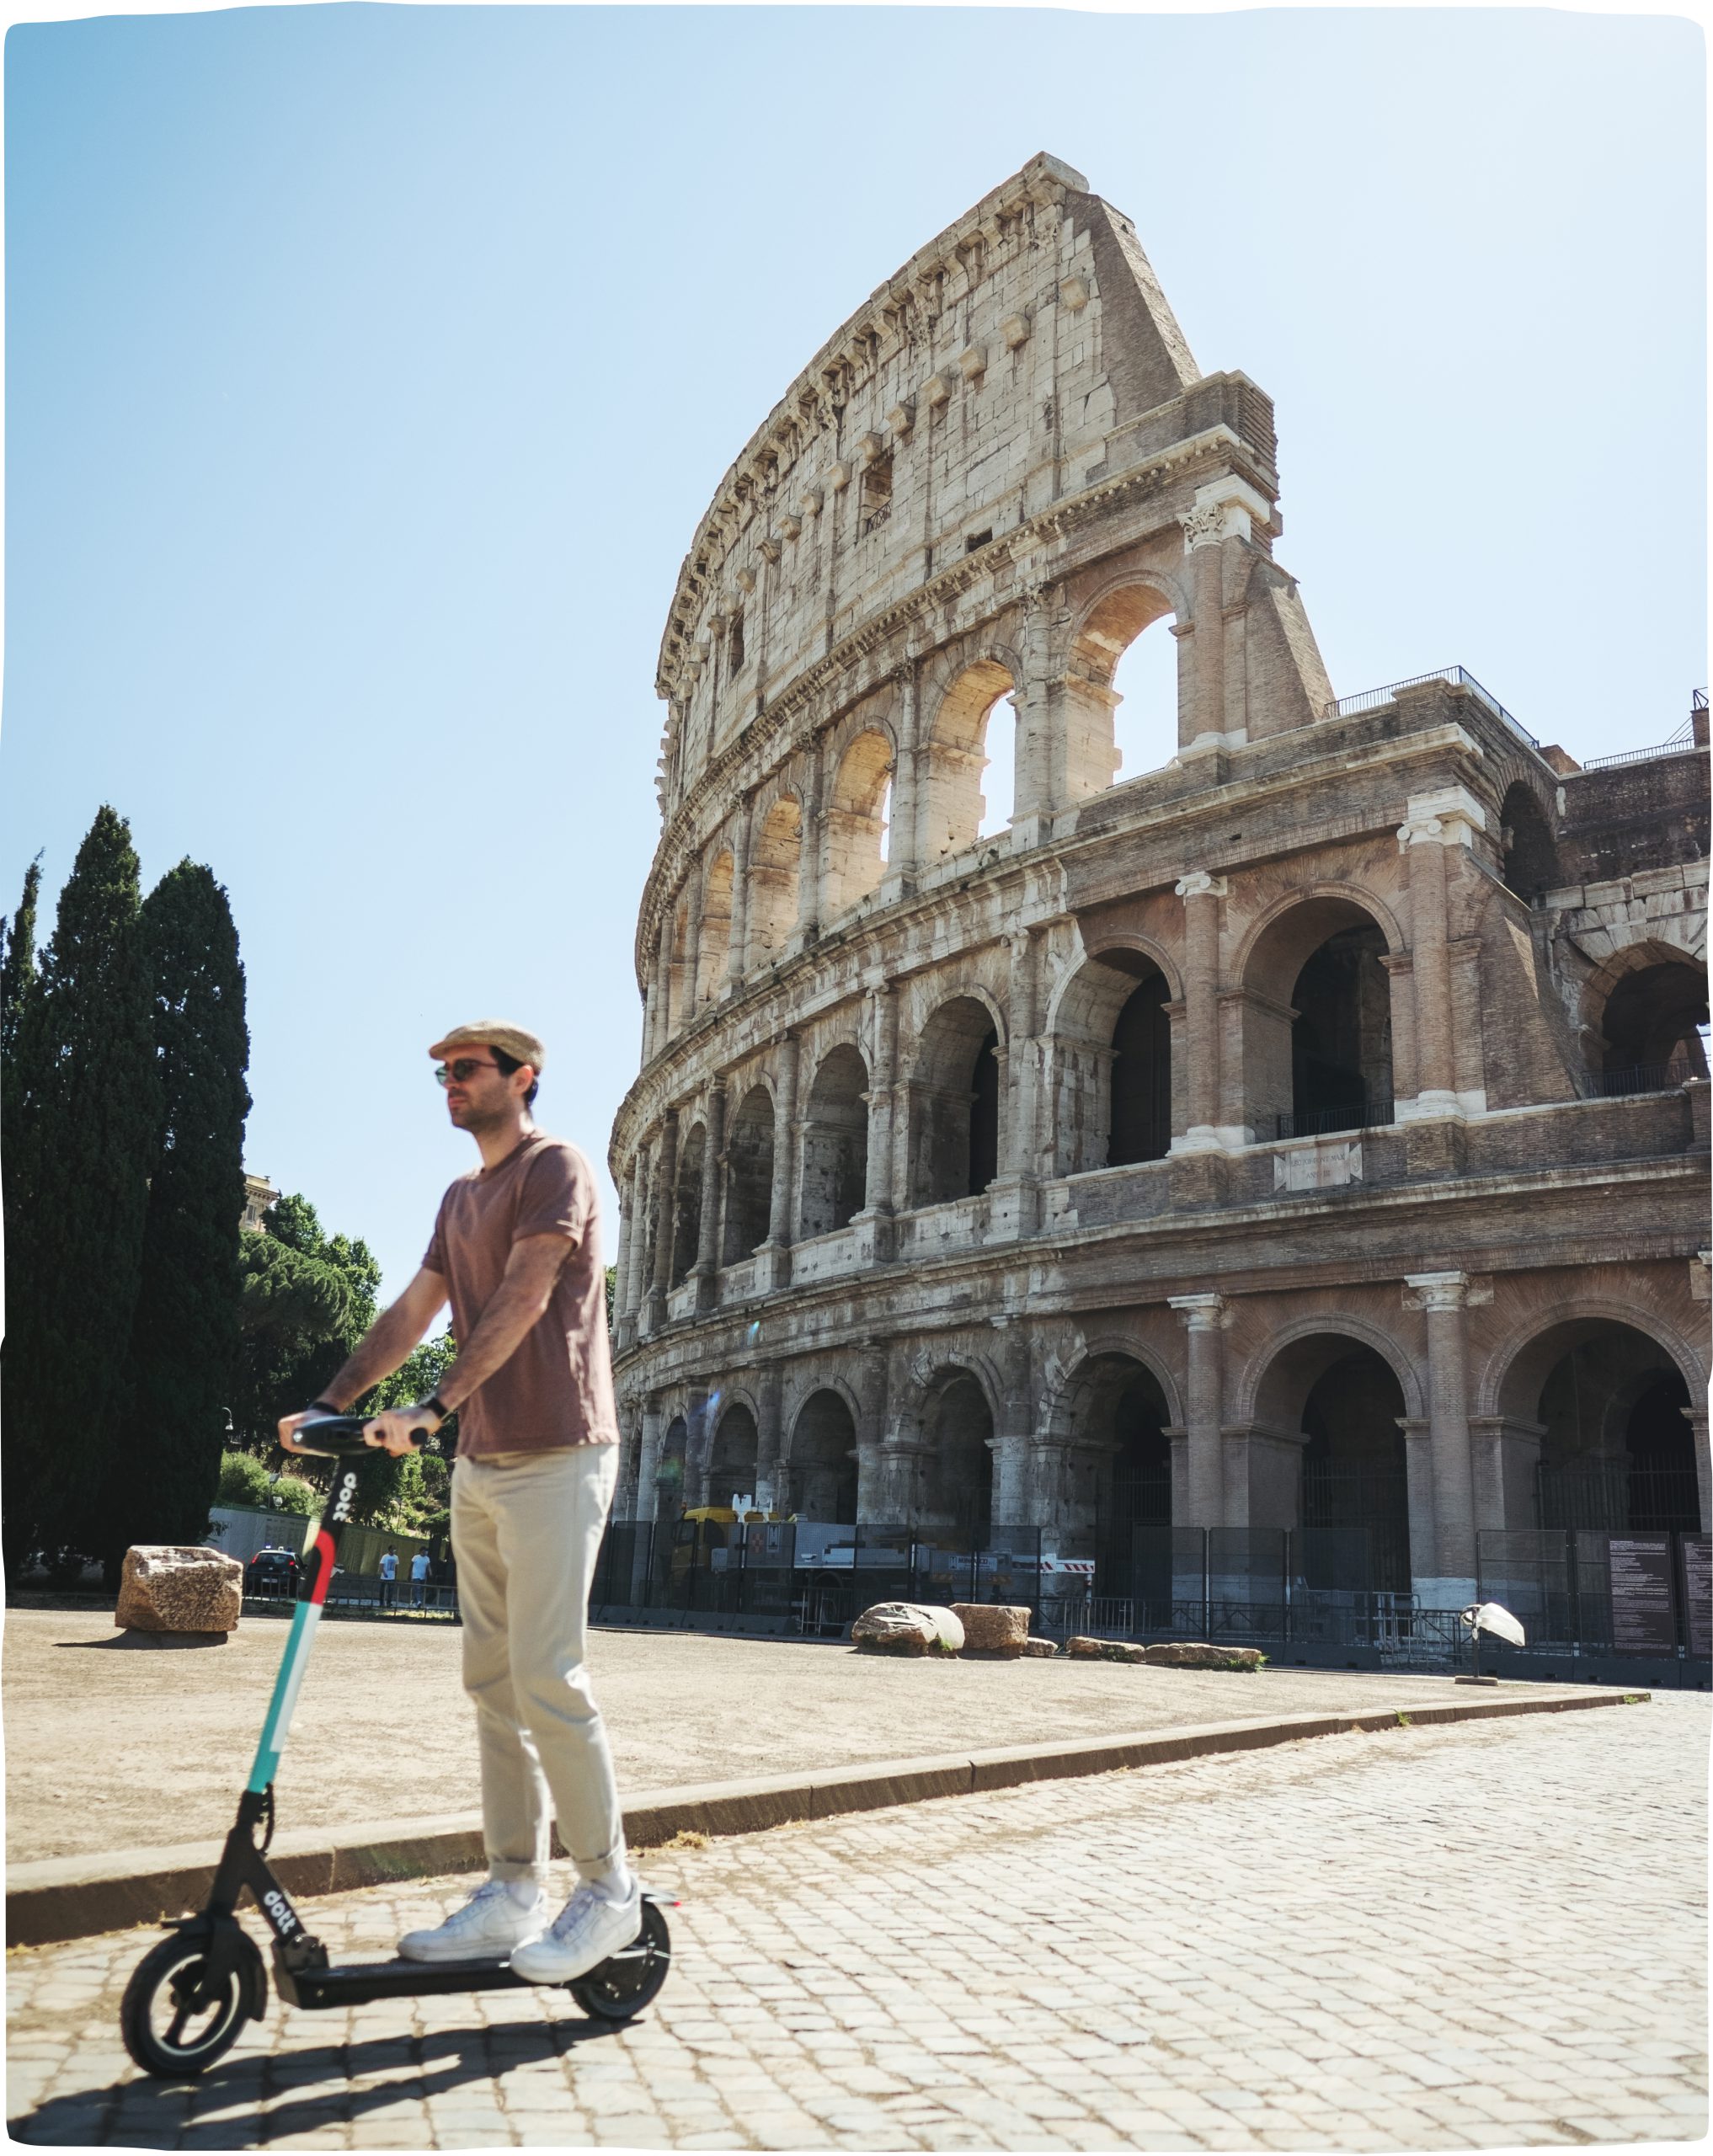 A man riding a scooter on a sunny day in front of the Colosseum in Rome.